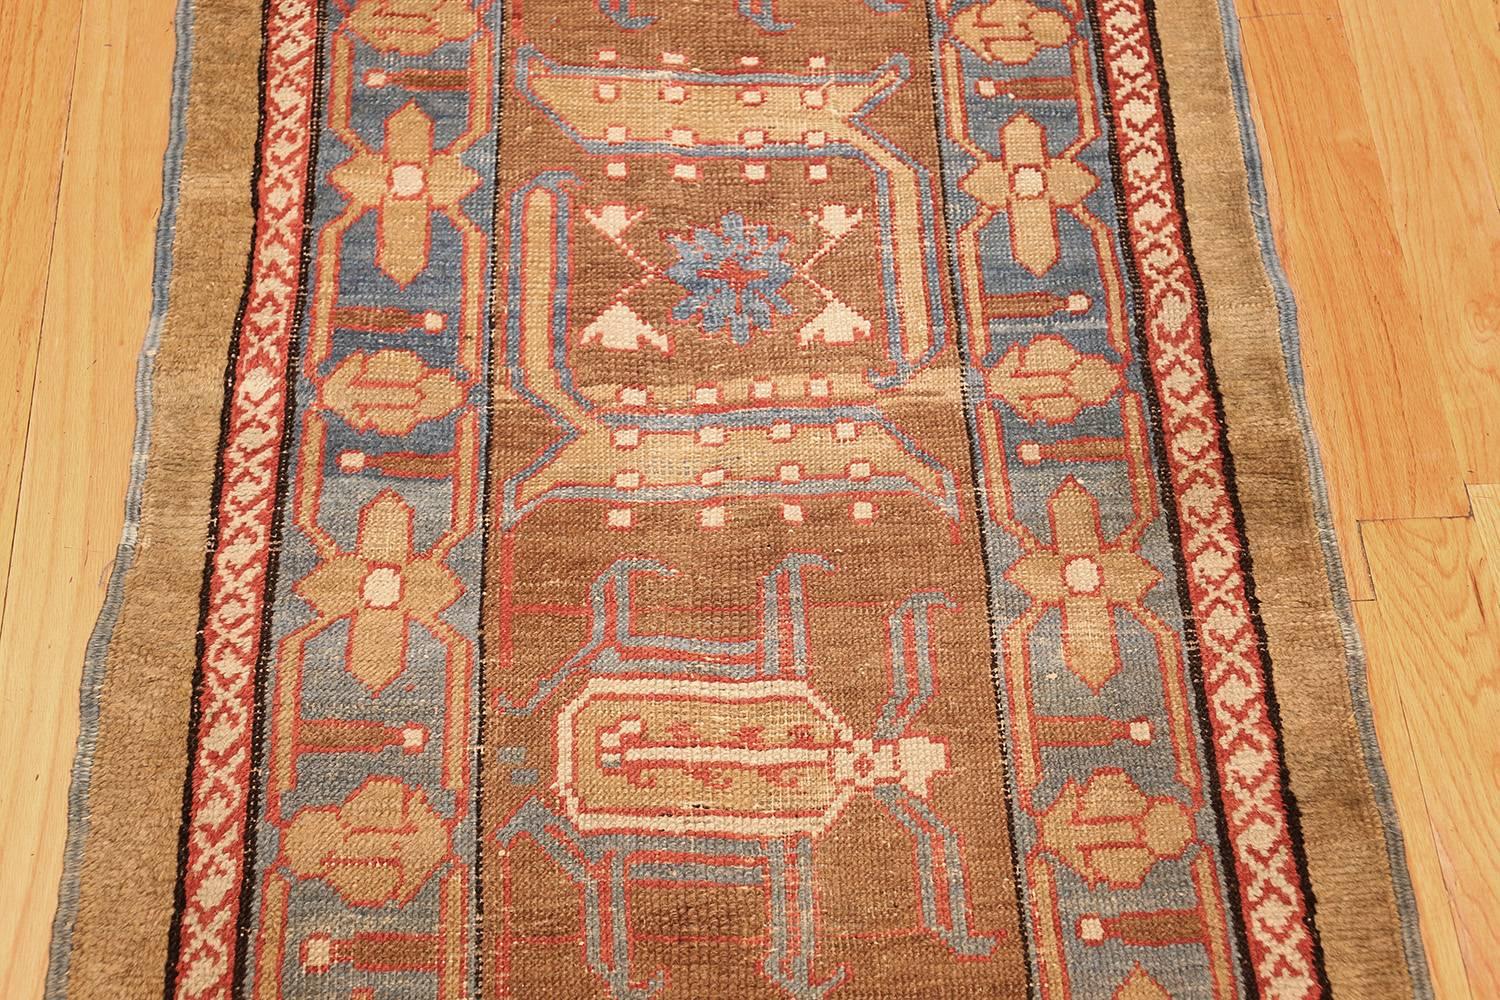 Hand-Knotted Rare Camel Hair Antique Bakshaish Persian Runner. Size: 2 ft 9 in x 17 ft 